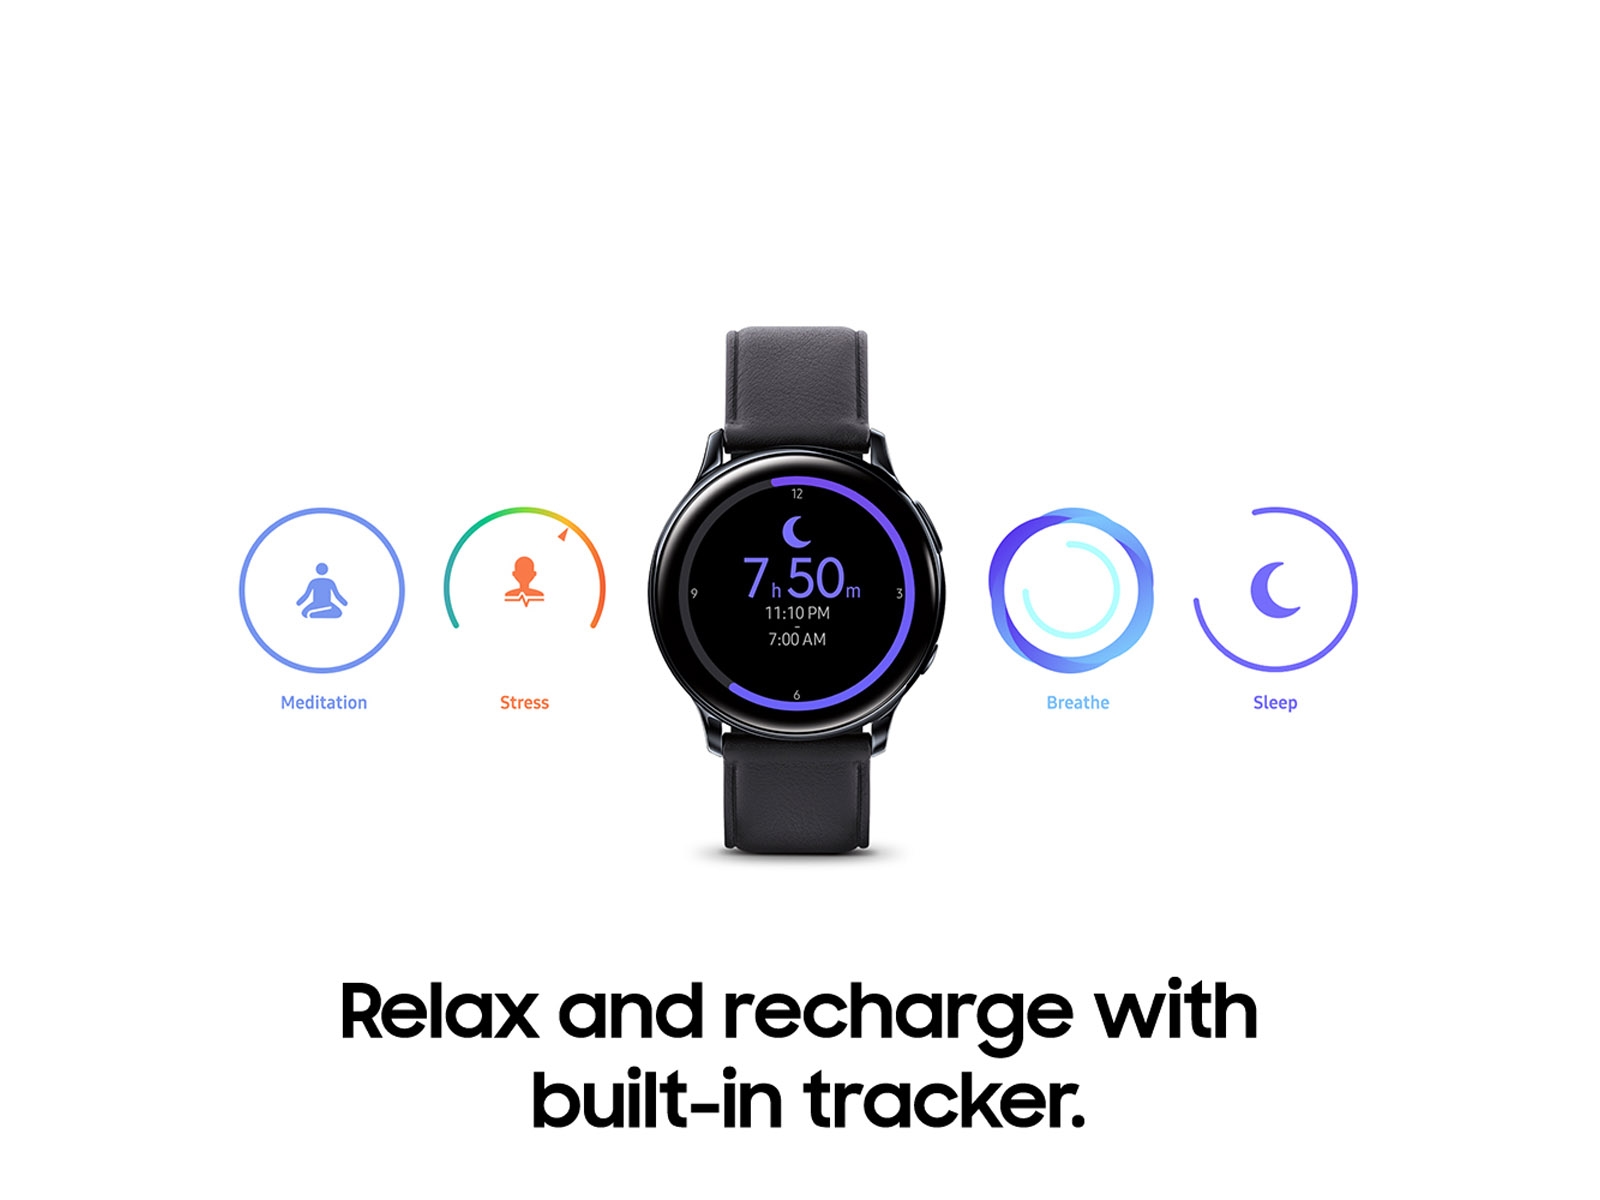 Thumbnail image of Galaxy Watch Active2 (40mm), Black (LTE)